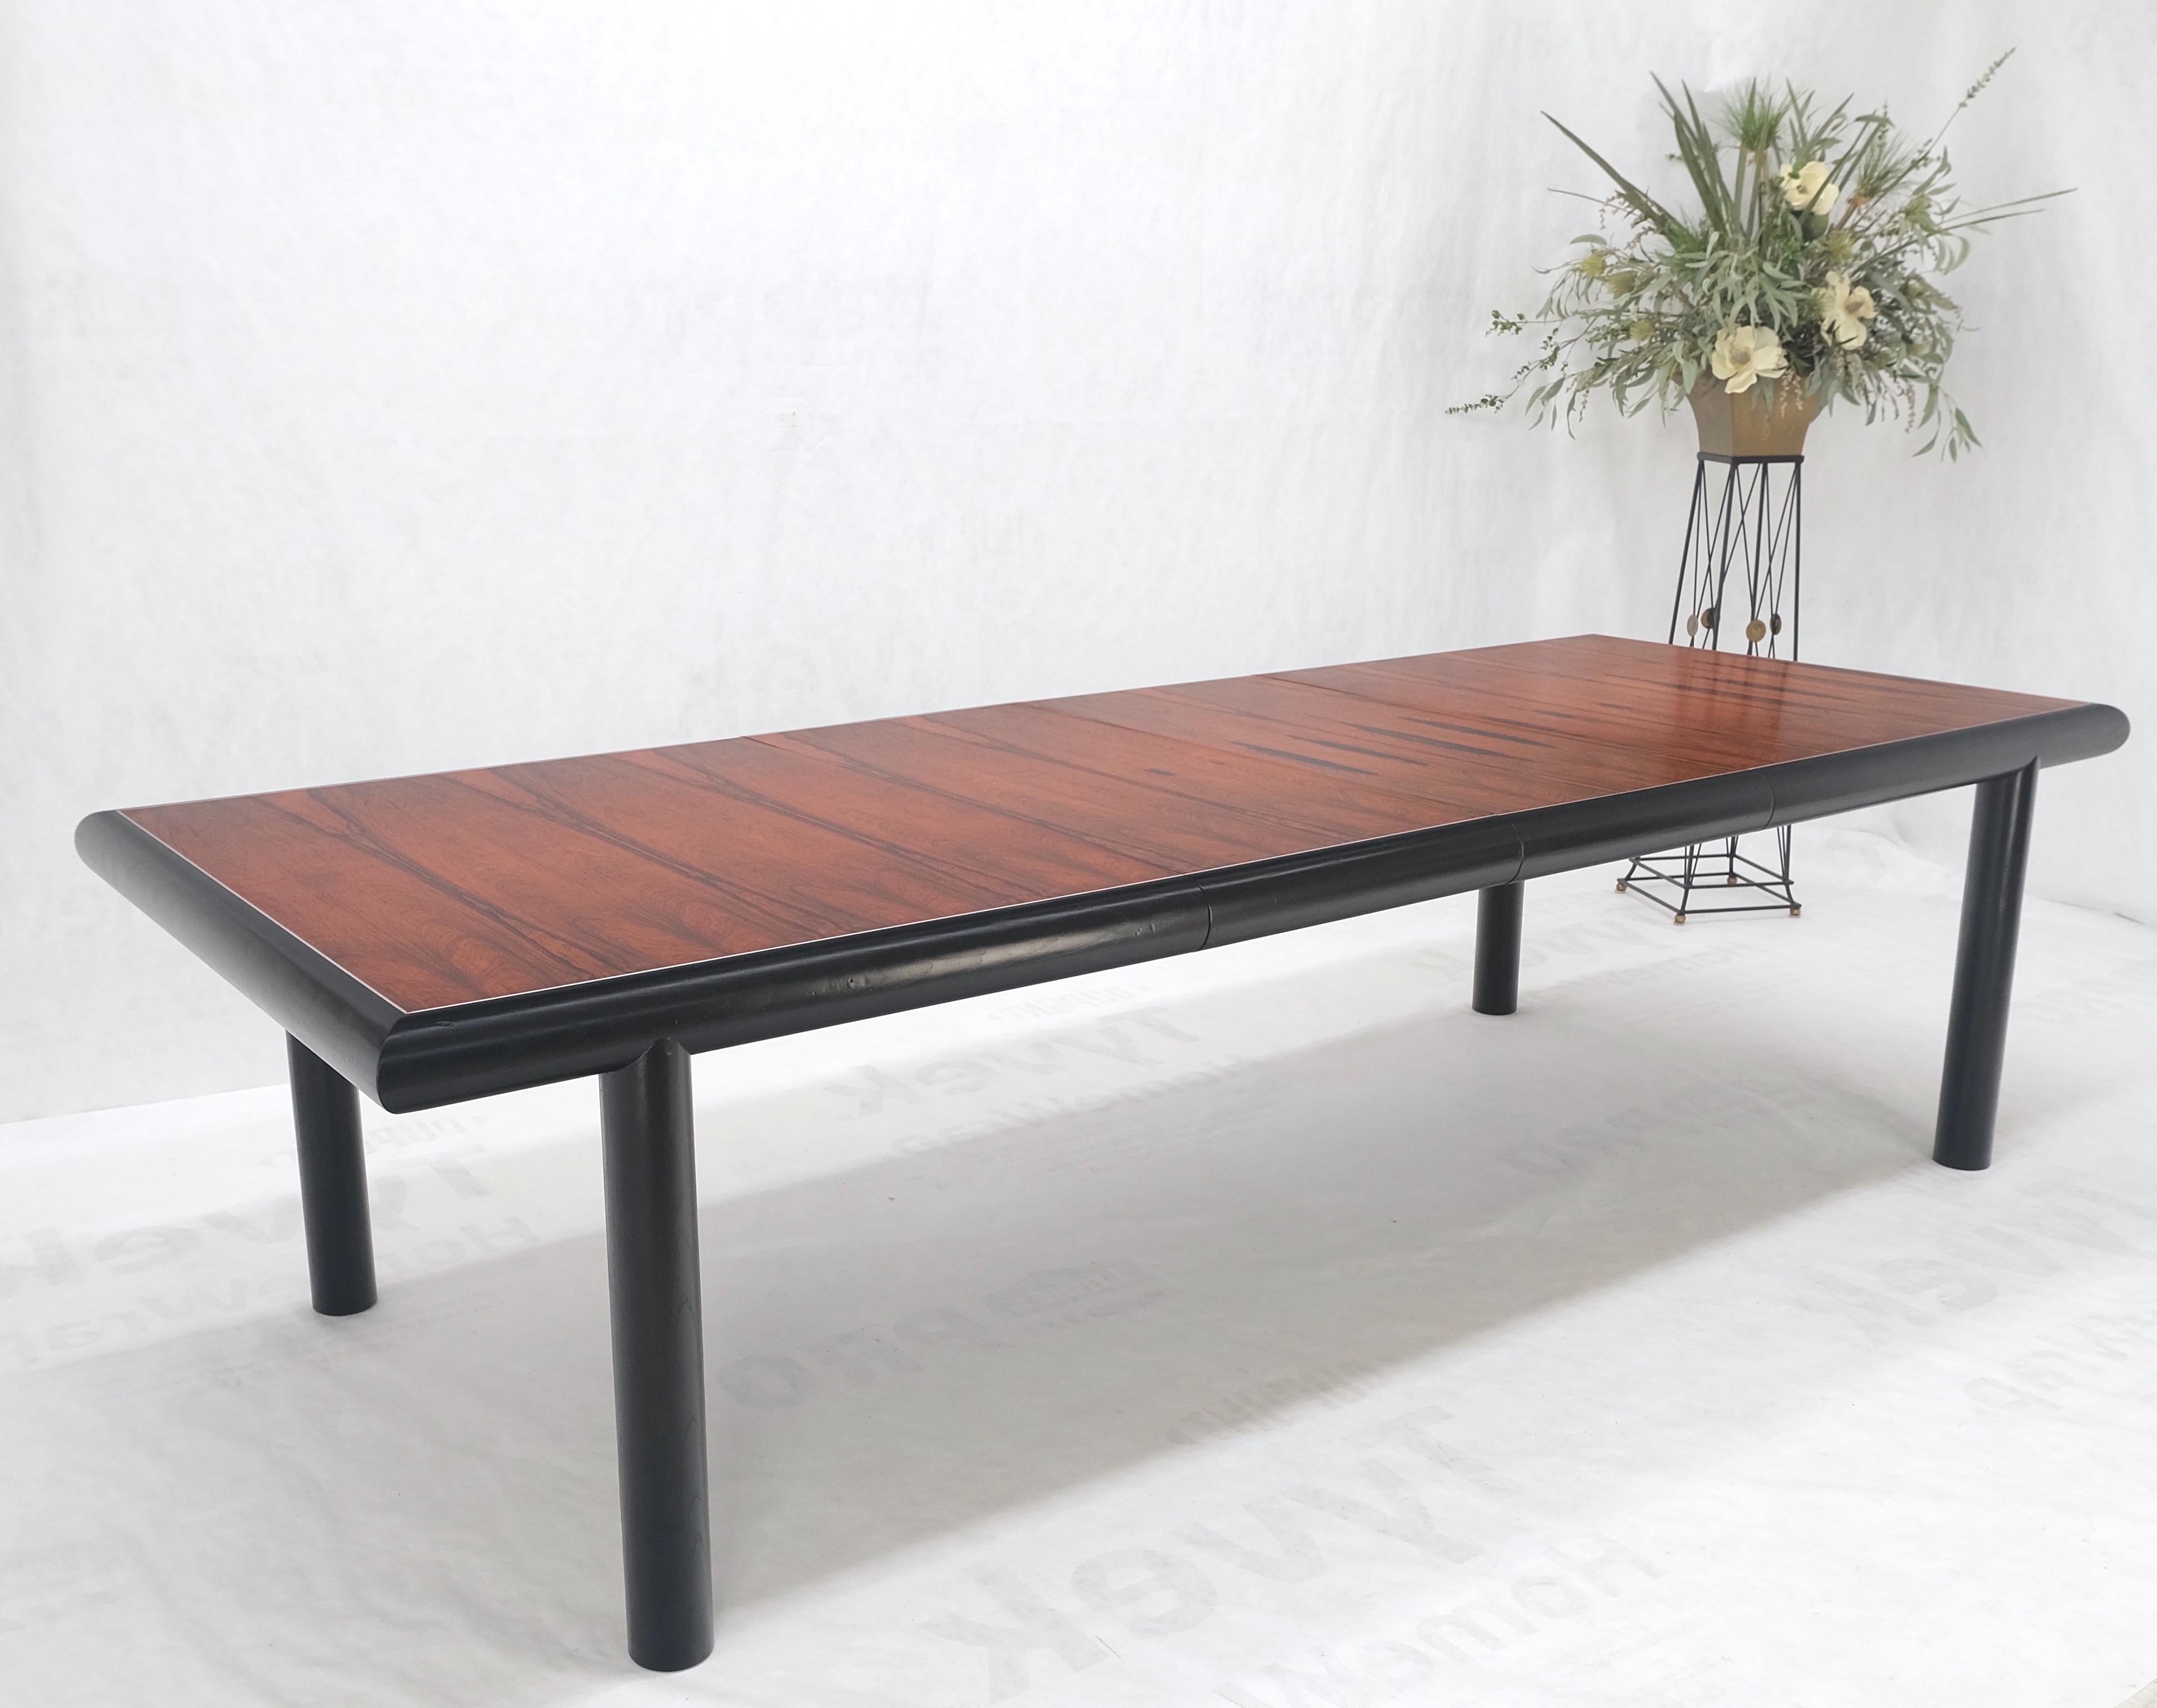 Rosewood Top Black Lacquer Base Massive Cylinder Shape Legs Dining Table MINT! For Sale 4